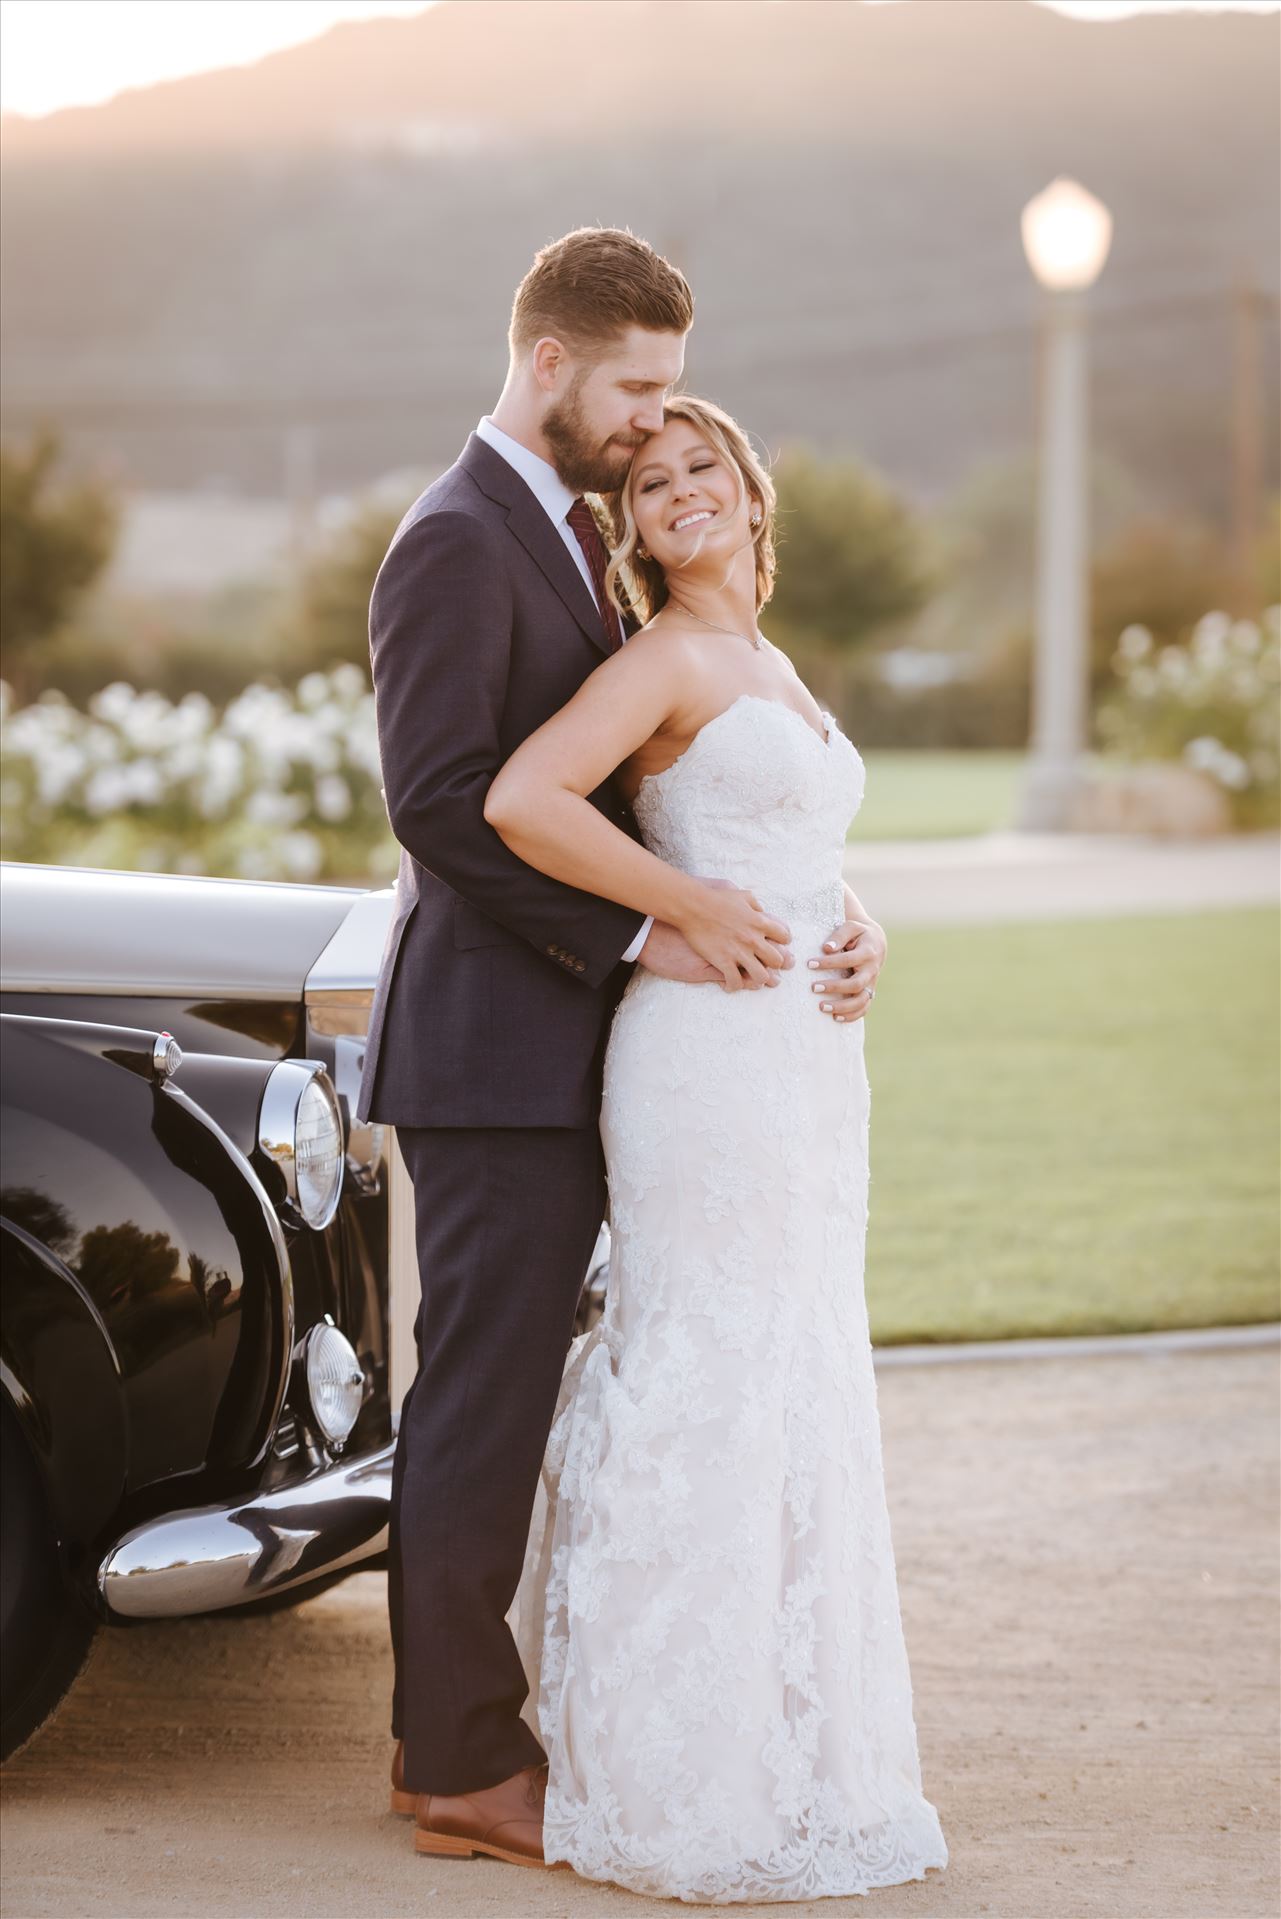 Port-7541.JPGWhite Barn in Edna Valley rustic chic wedding by Mirror's Edge Photography, San Luis Obispo County Wedding and Engagement Photographer.  Sunset elegance with Rolls Royce and Bride and Groom in front of the White Barn in Edna Valley California.